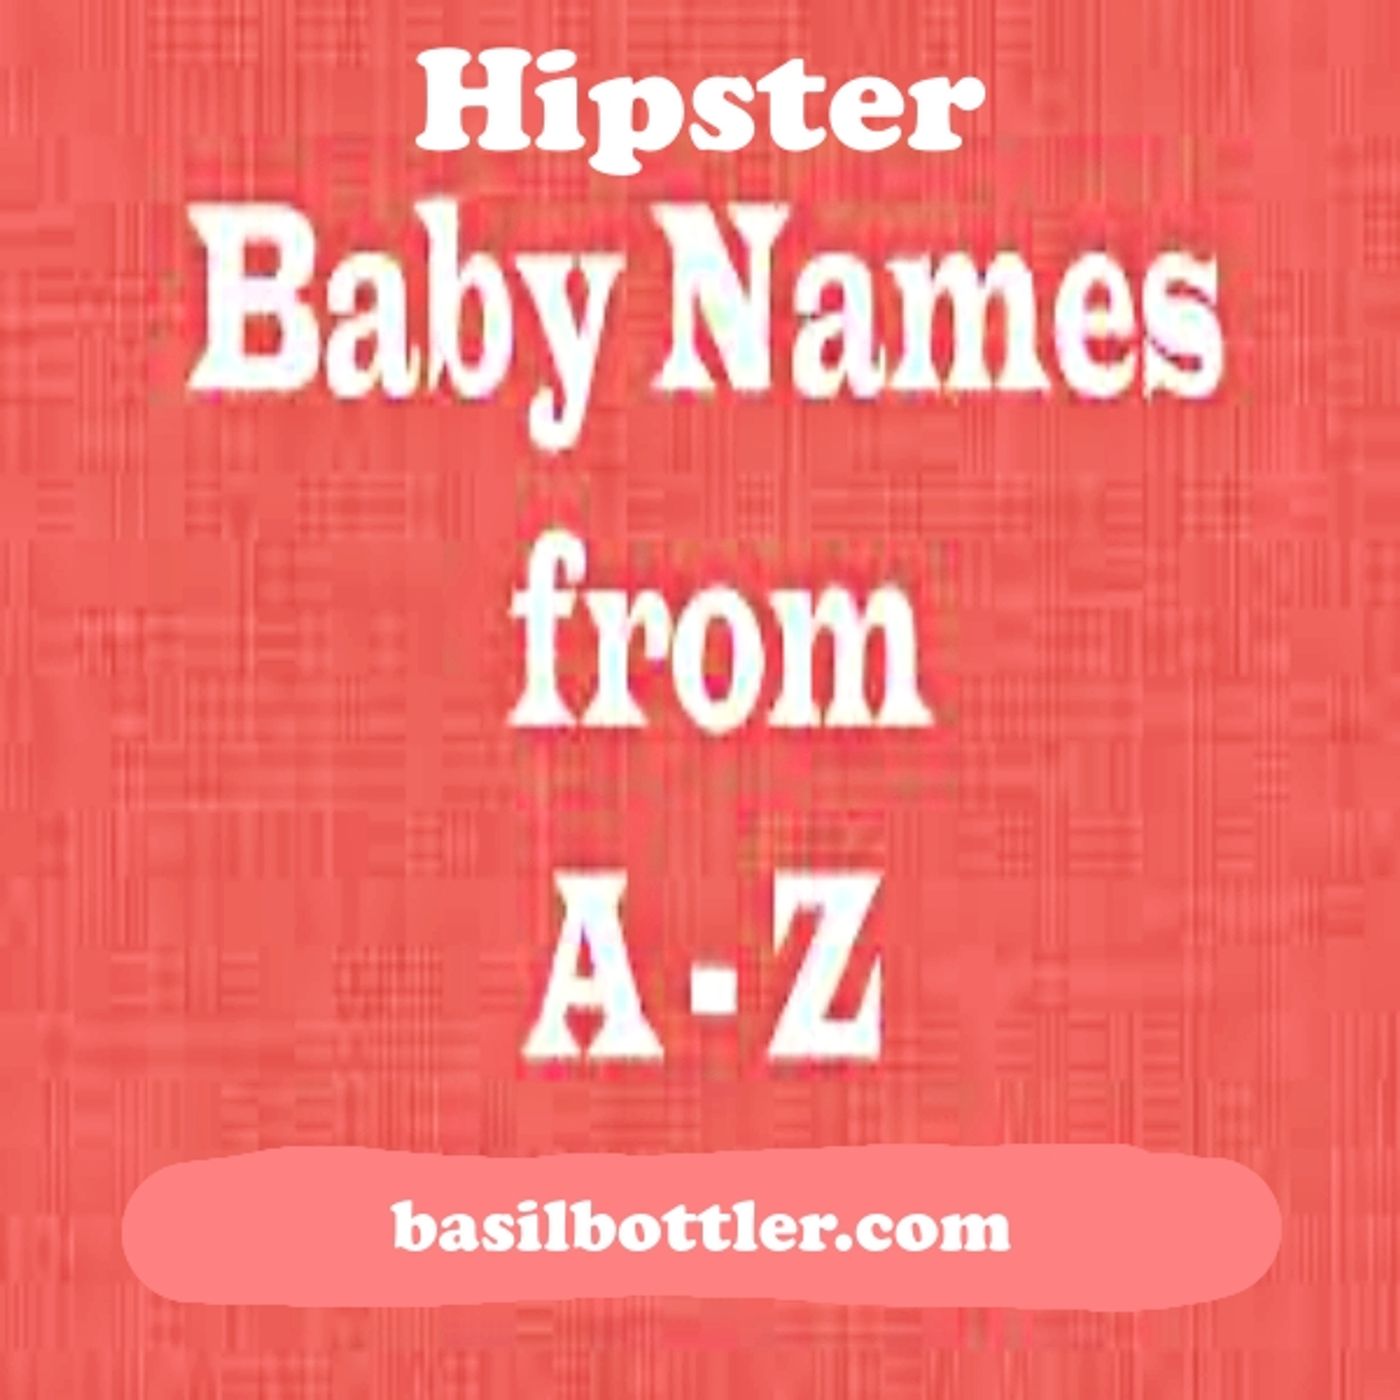 A - Z of hipster baby names part 2